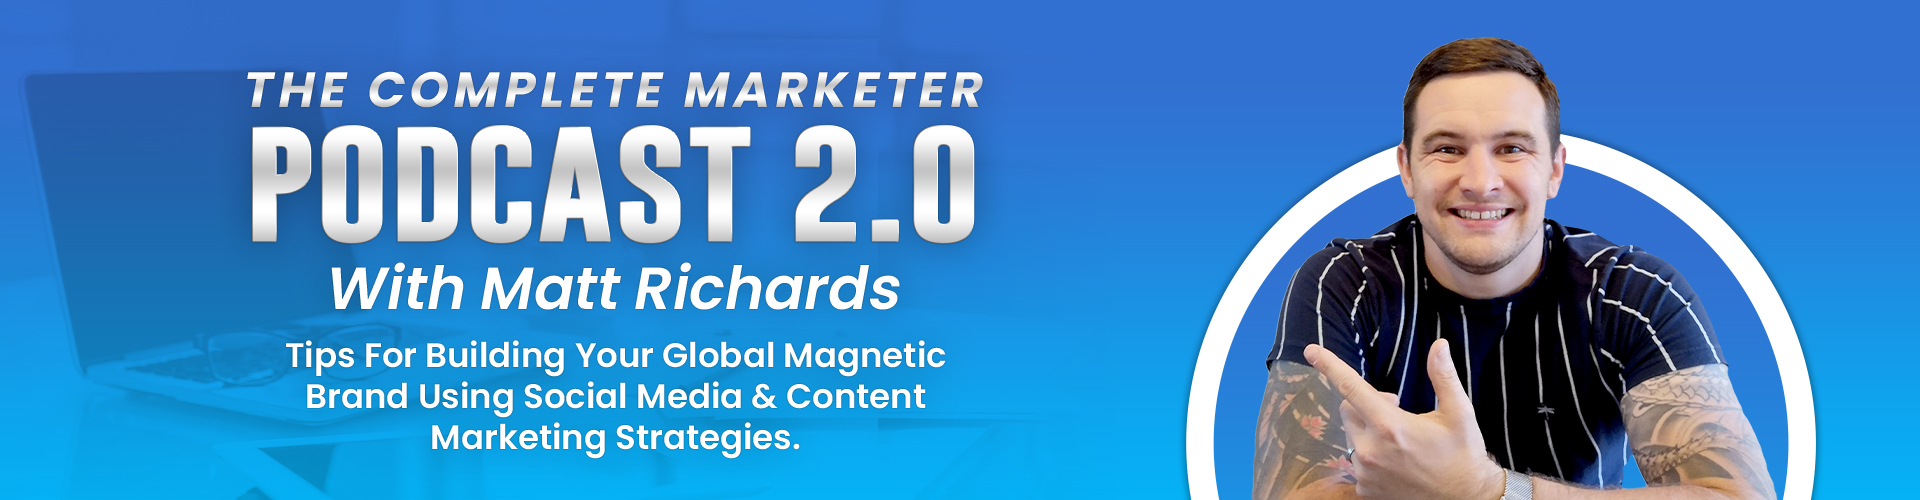 The Complete Marketer Podcast 2.0